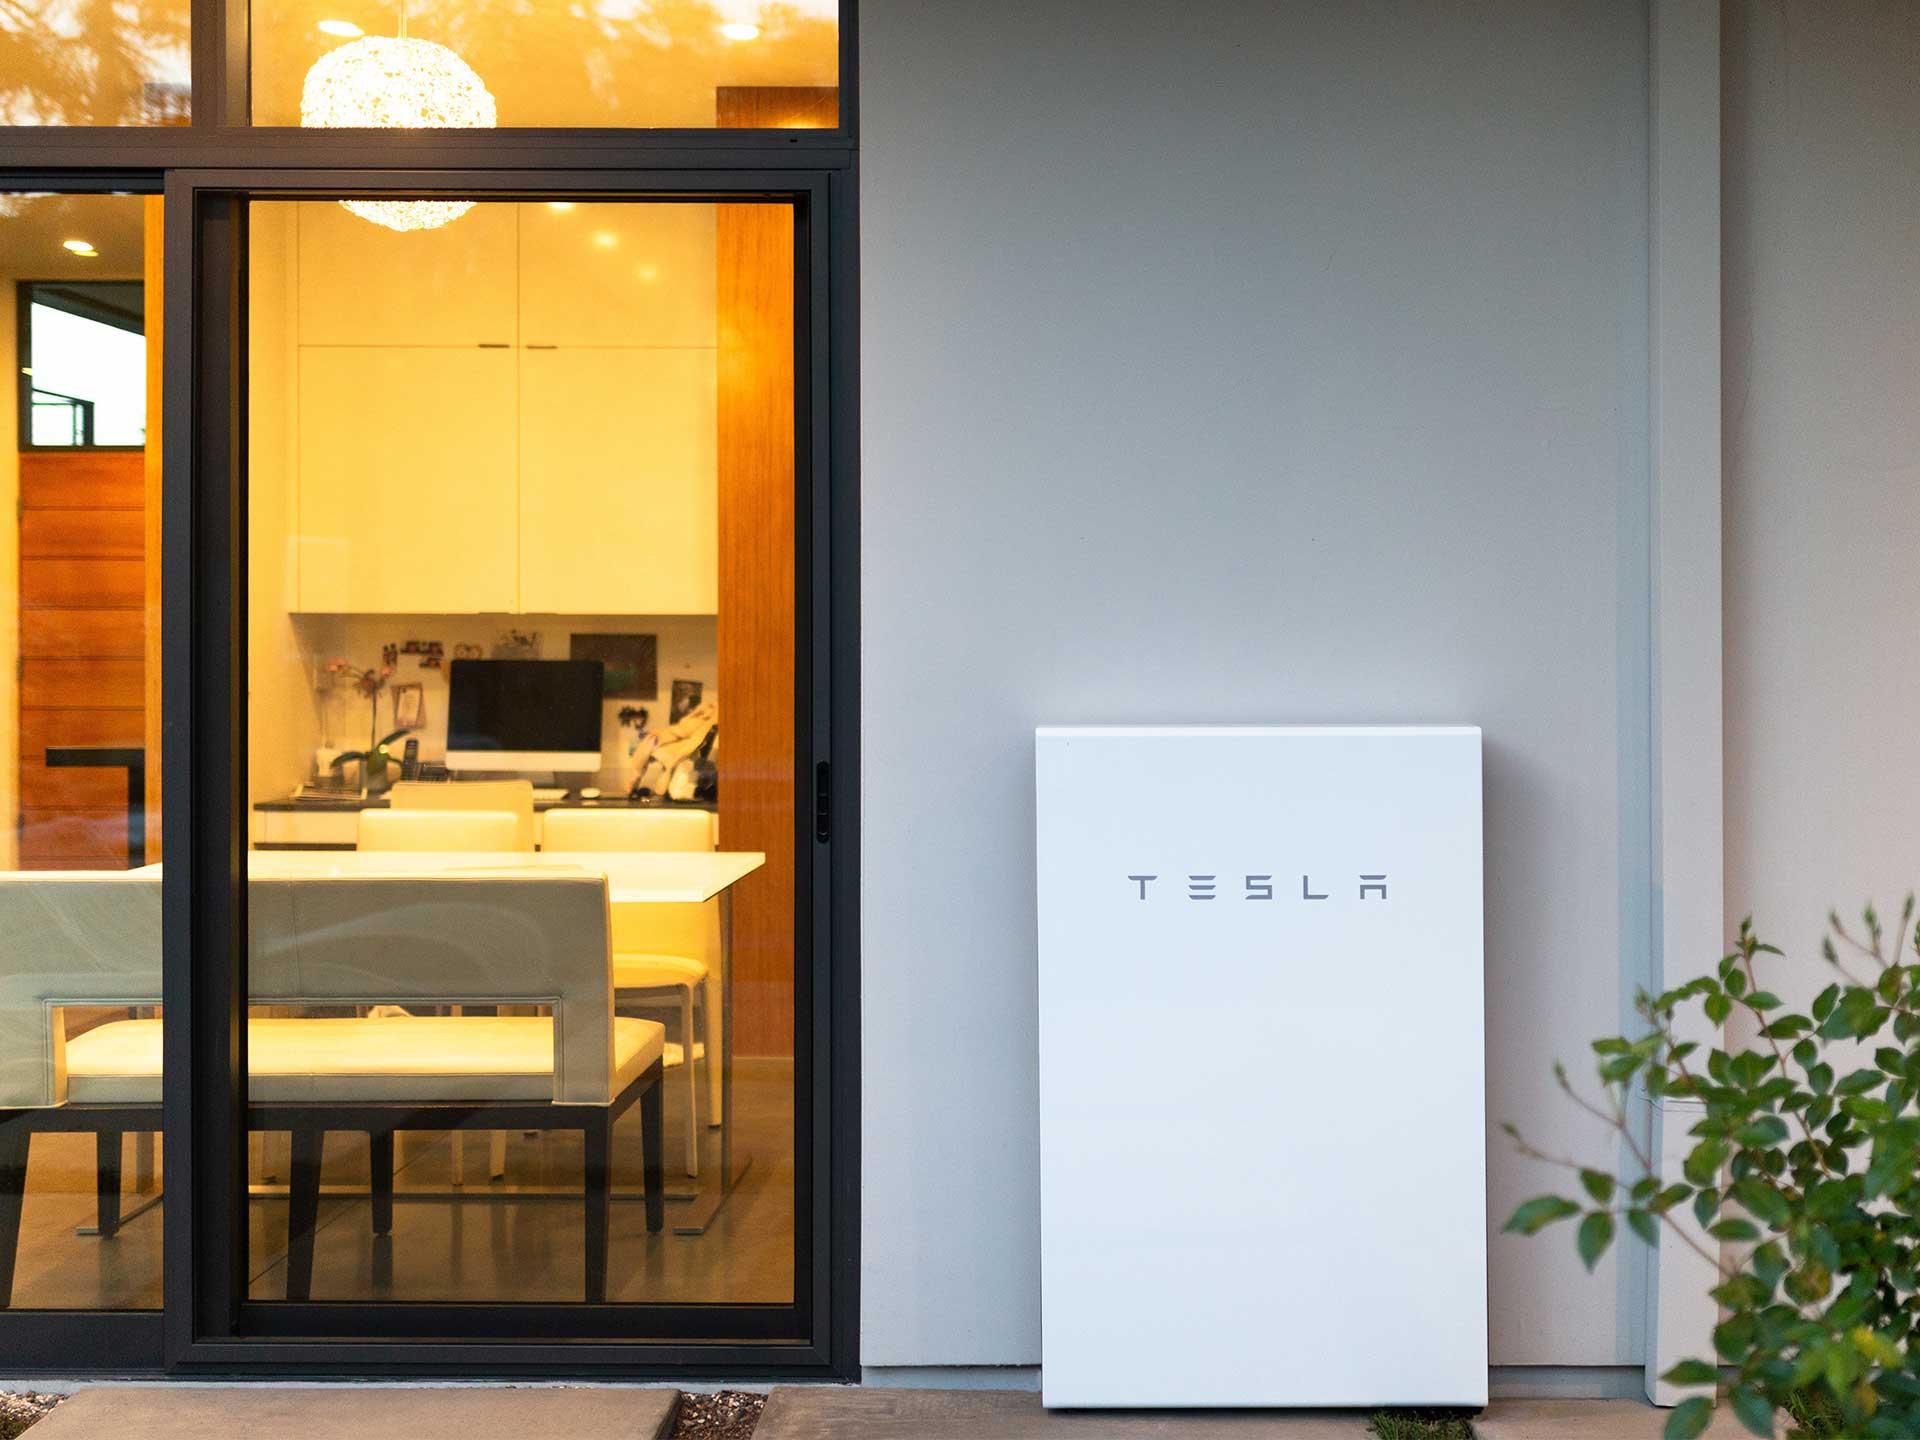 Bring solar energy into your home with the Tesla Powerwall